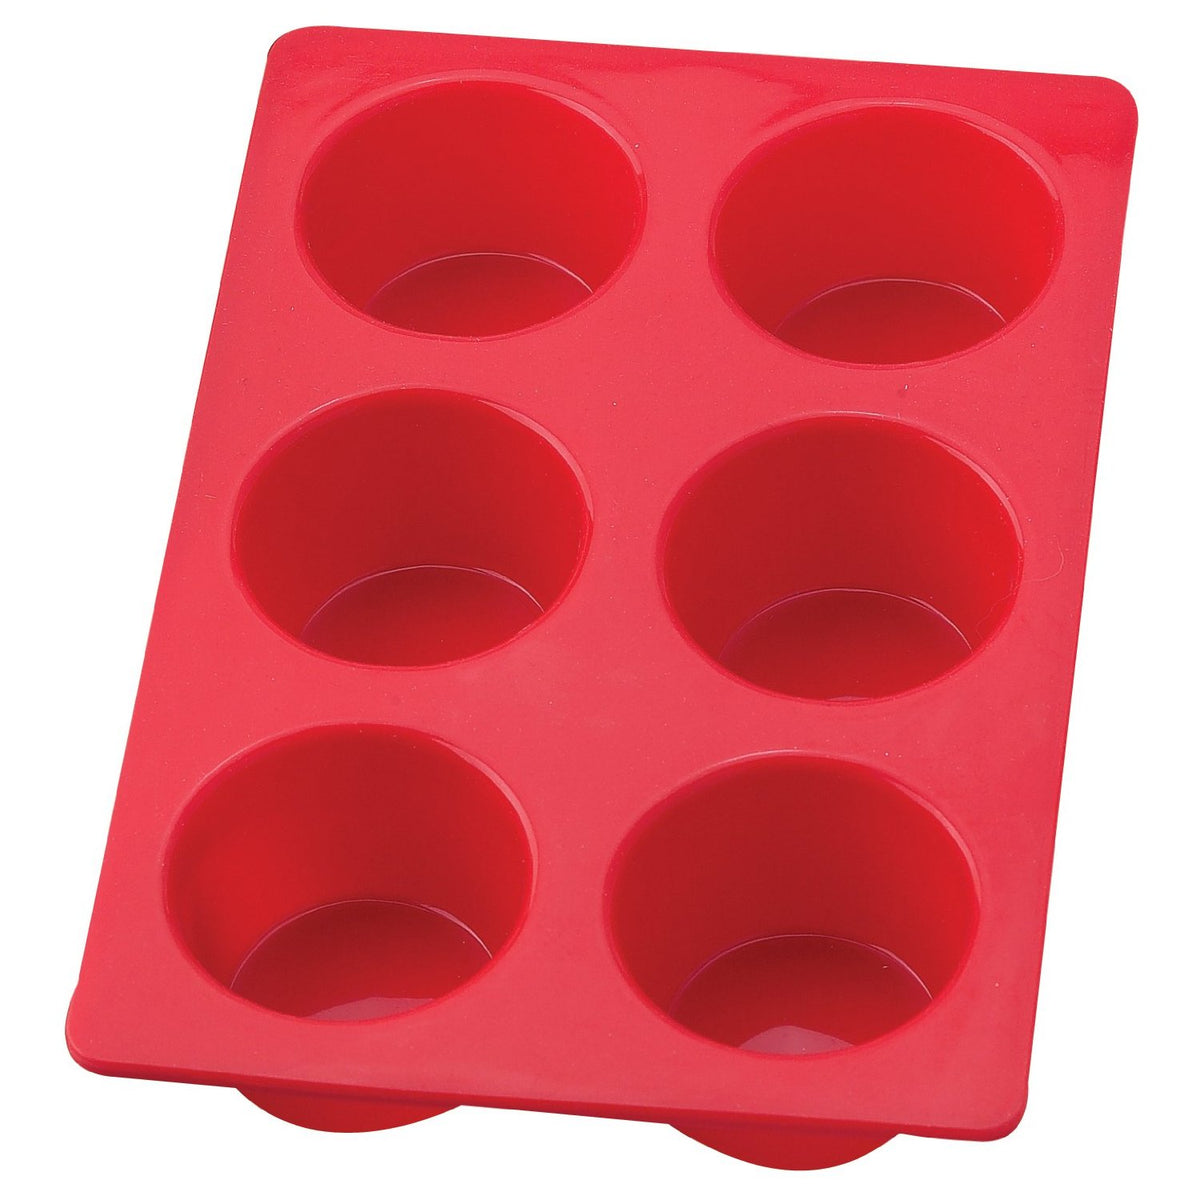 The Essentials 43629 Silicone Muffin Pan, 6 Cup, 11" x 7-1/2" x 2"